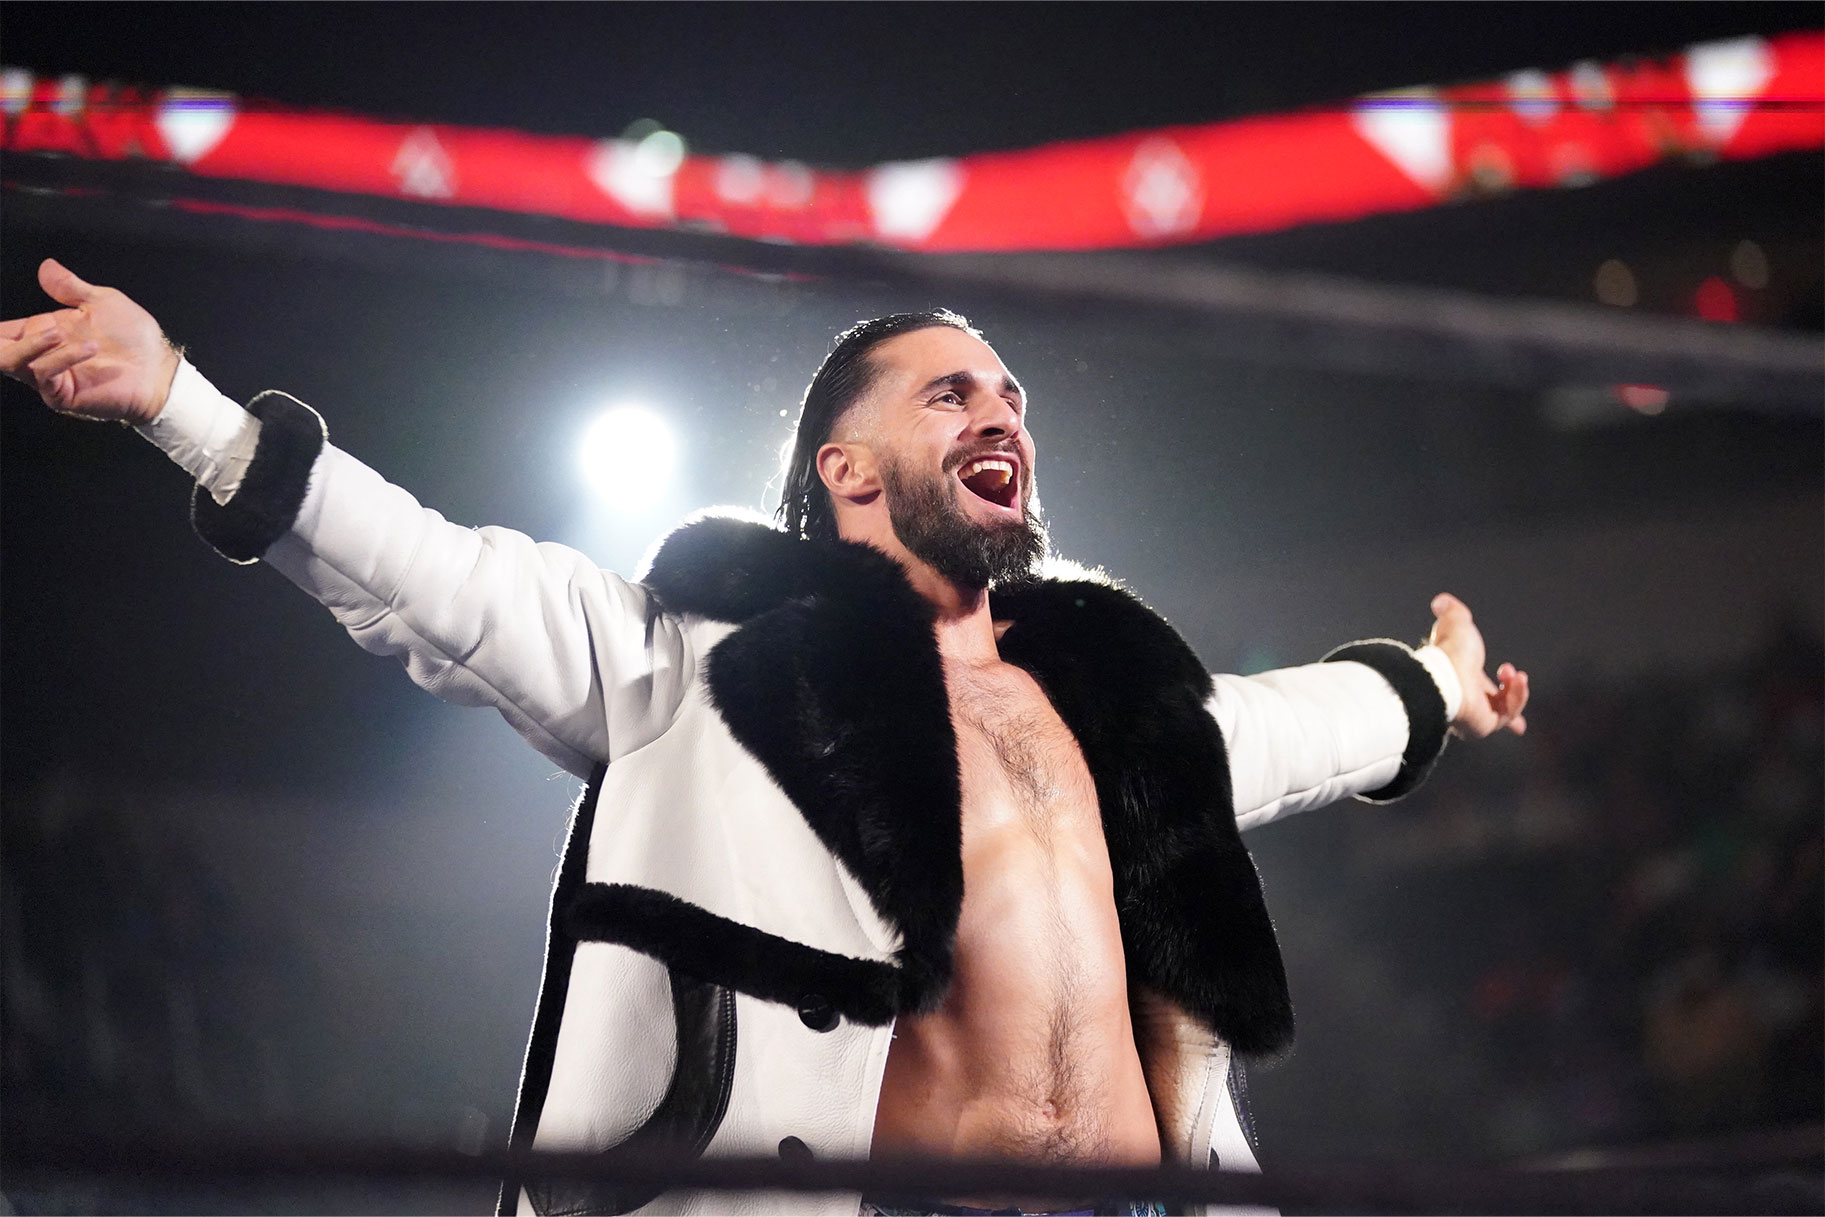 Seth Rollins wearing a white coat in the ring, smiling with his arms outstretched